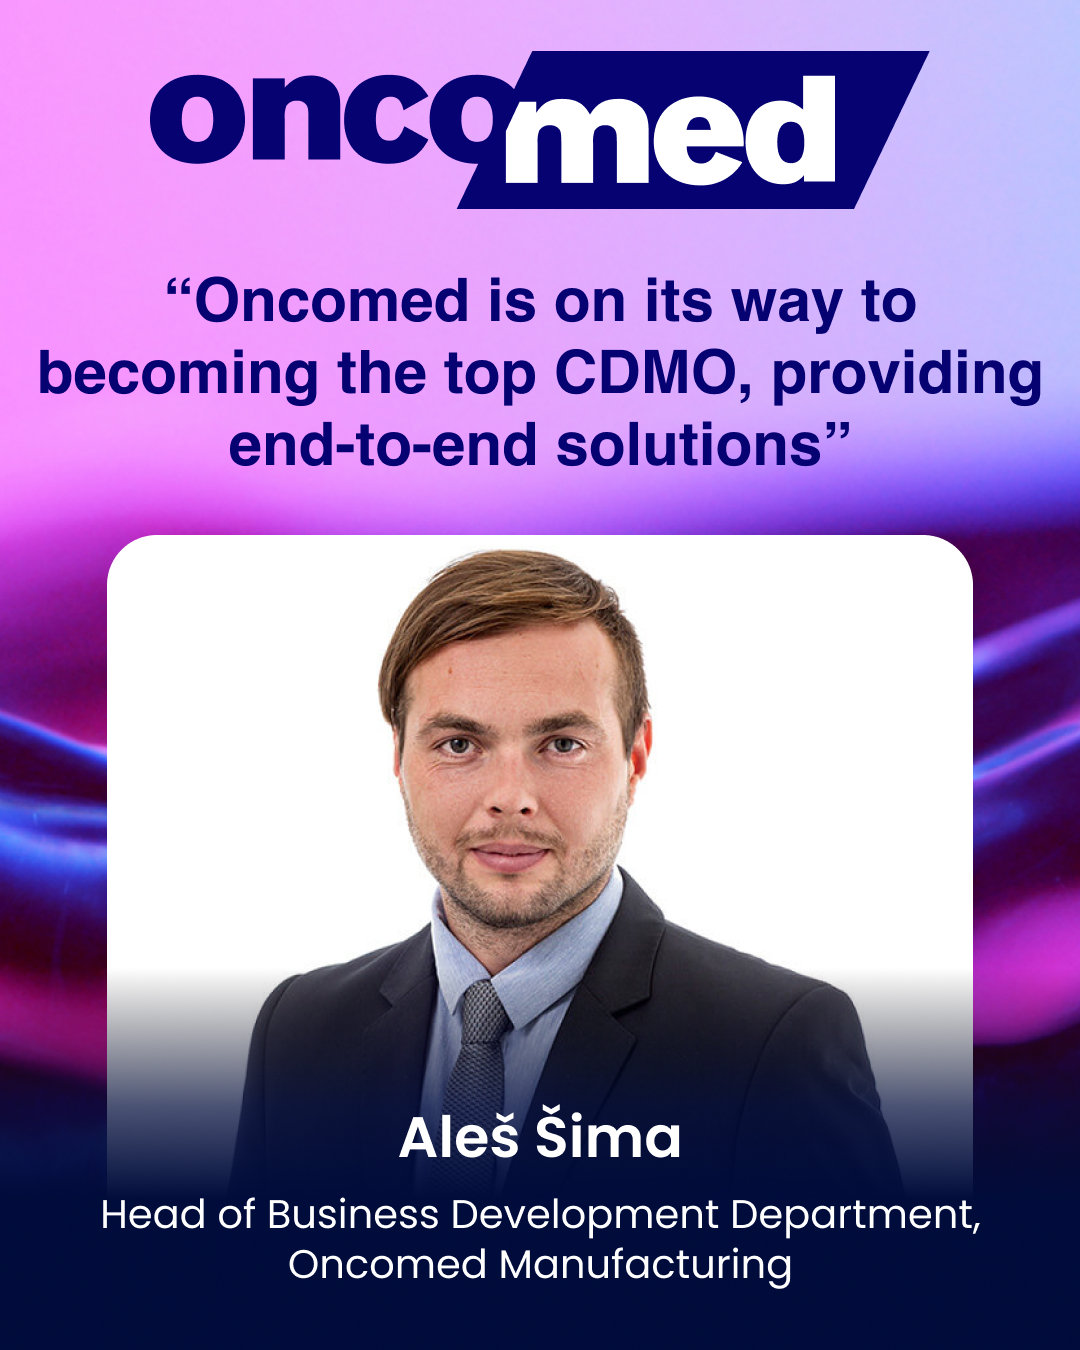 “Oncomed is on its way to becoming the top CDMO, providing end-to-end solutions”